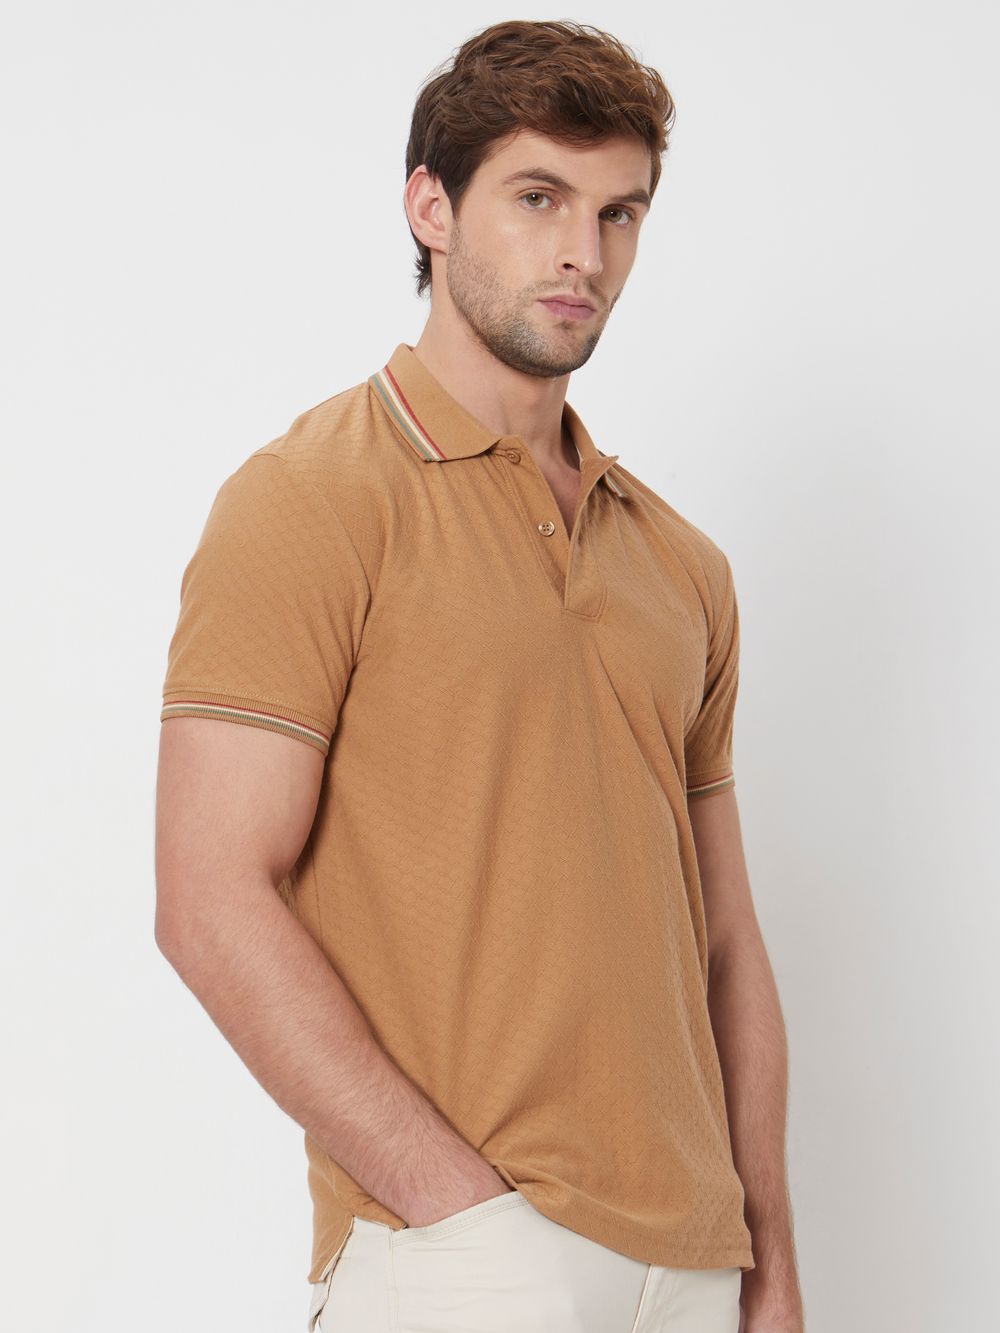 Khaki Textured Tipped Collar Slim Fit Casual Polo